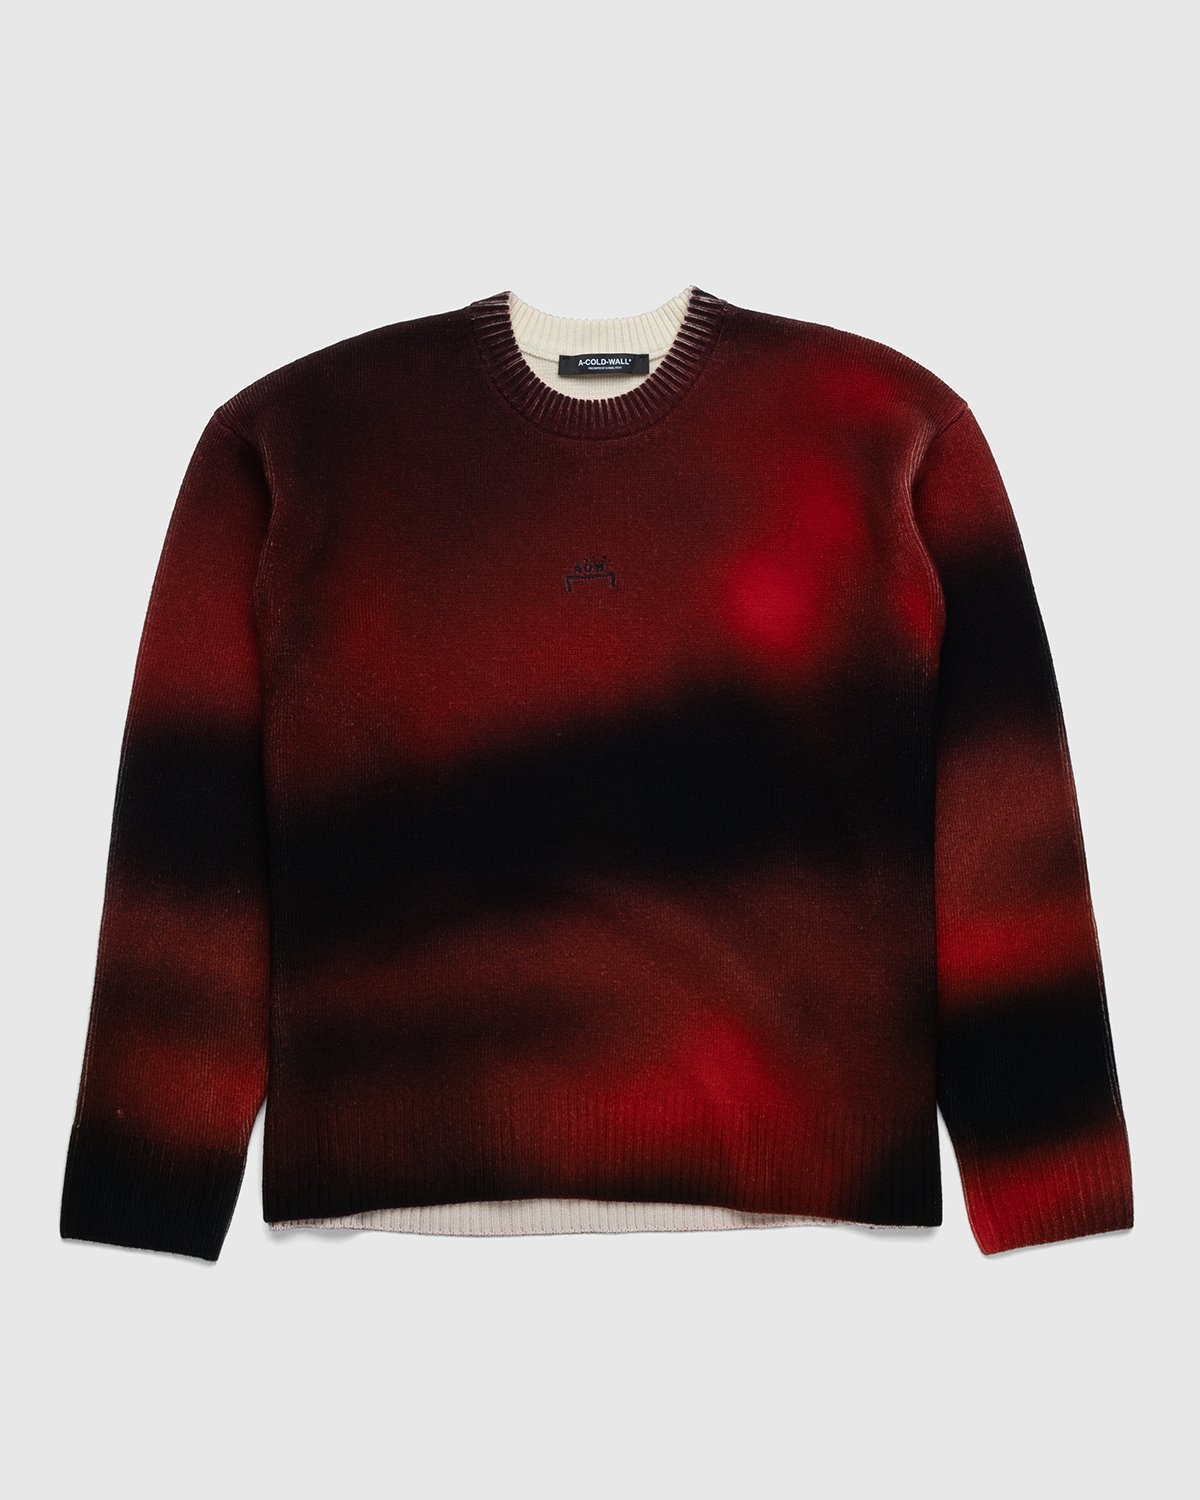 A-Cold-Wall* – Digital Print Knit Red - Knitwear - Red - Image 1